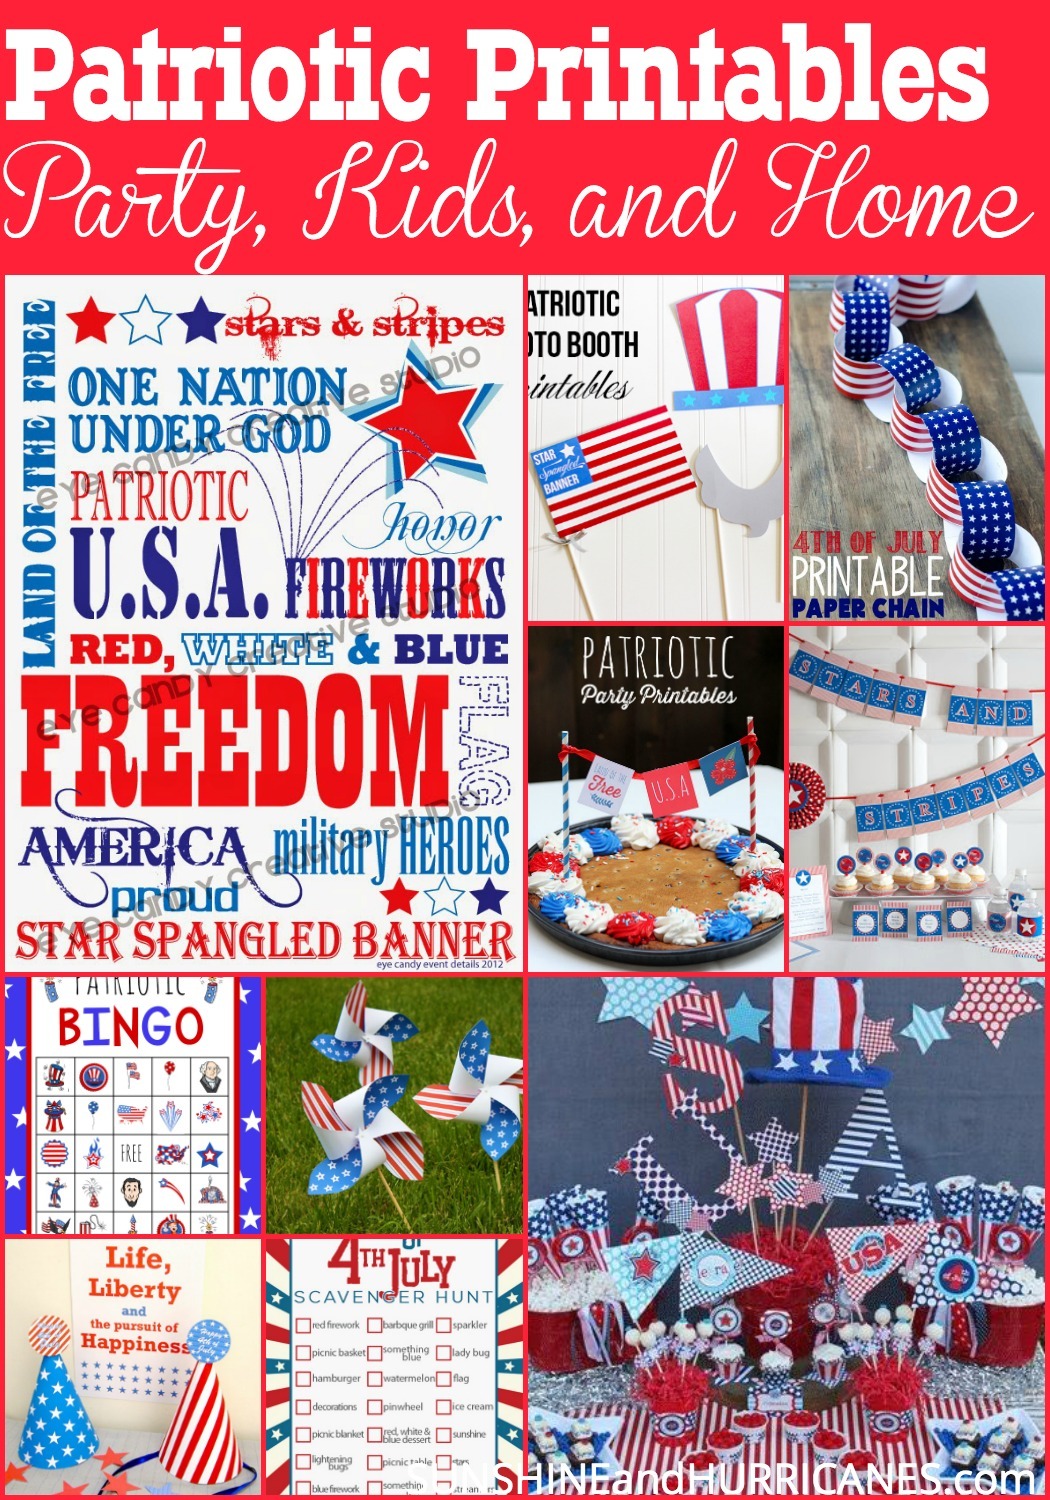 Everything you need to celebrate any Patriotic Event, these printables are FREE and will make your BBQ, party, or home festive and exciting! Whether you want to add a patriotic flair to your decor or quickly make your party something special, these printables are your answer! Activities for the kids and fun ideas for the 4th of July, Memorial Day and Labor Day included!